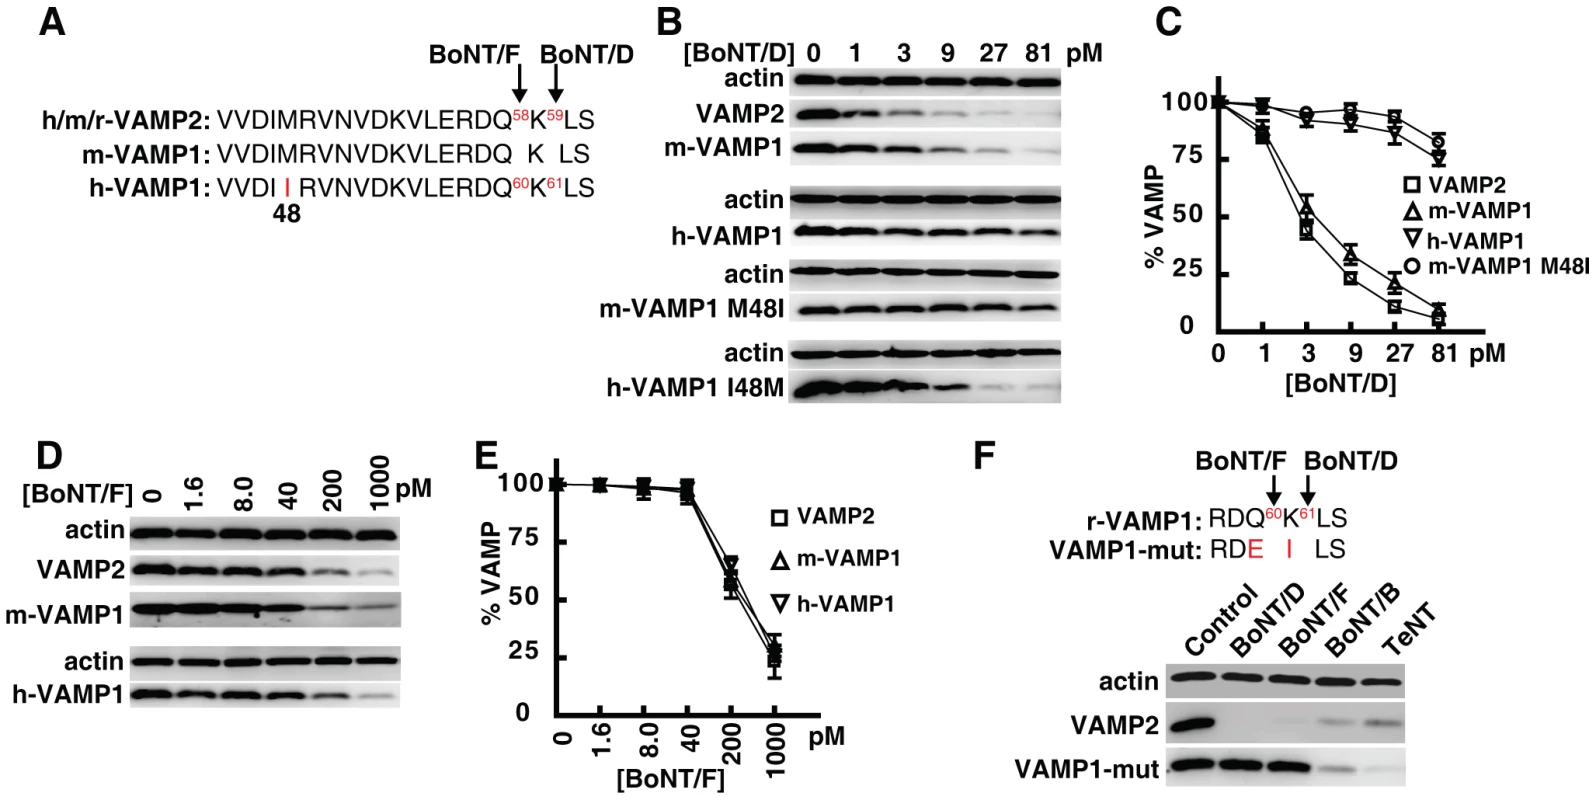 Human VAMP1 is a poor substrate for BoNT/D in neurons.